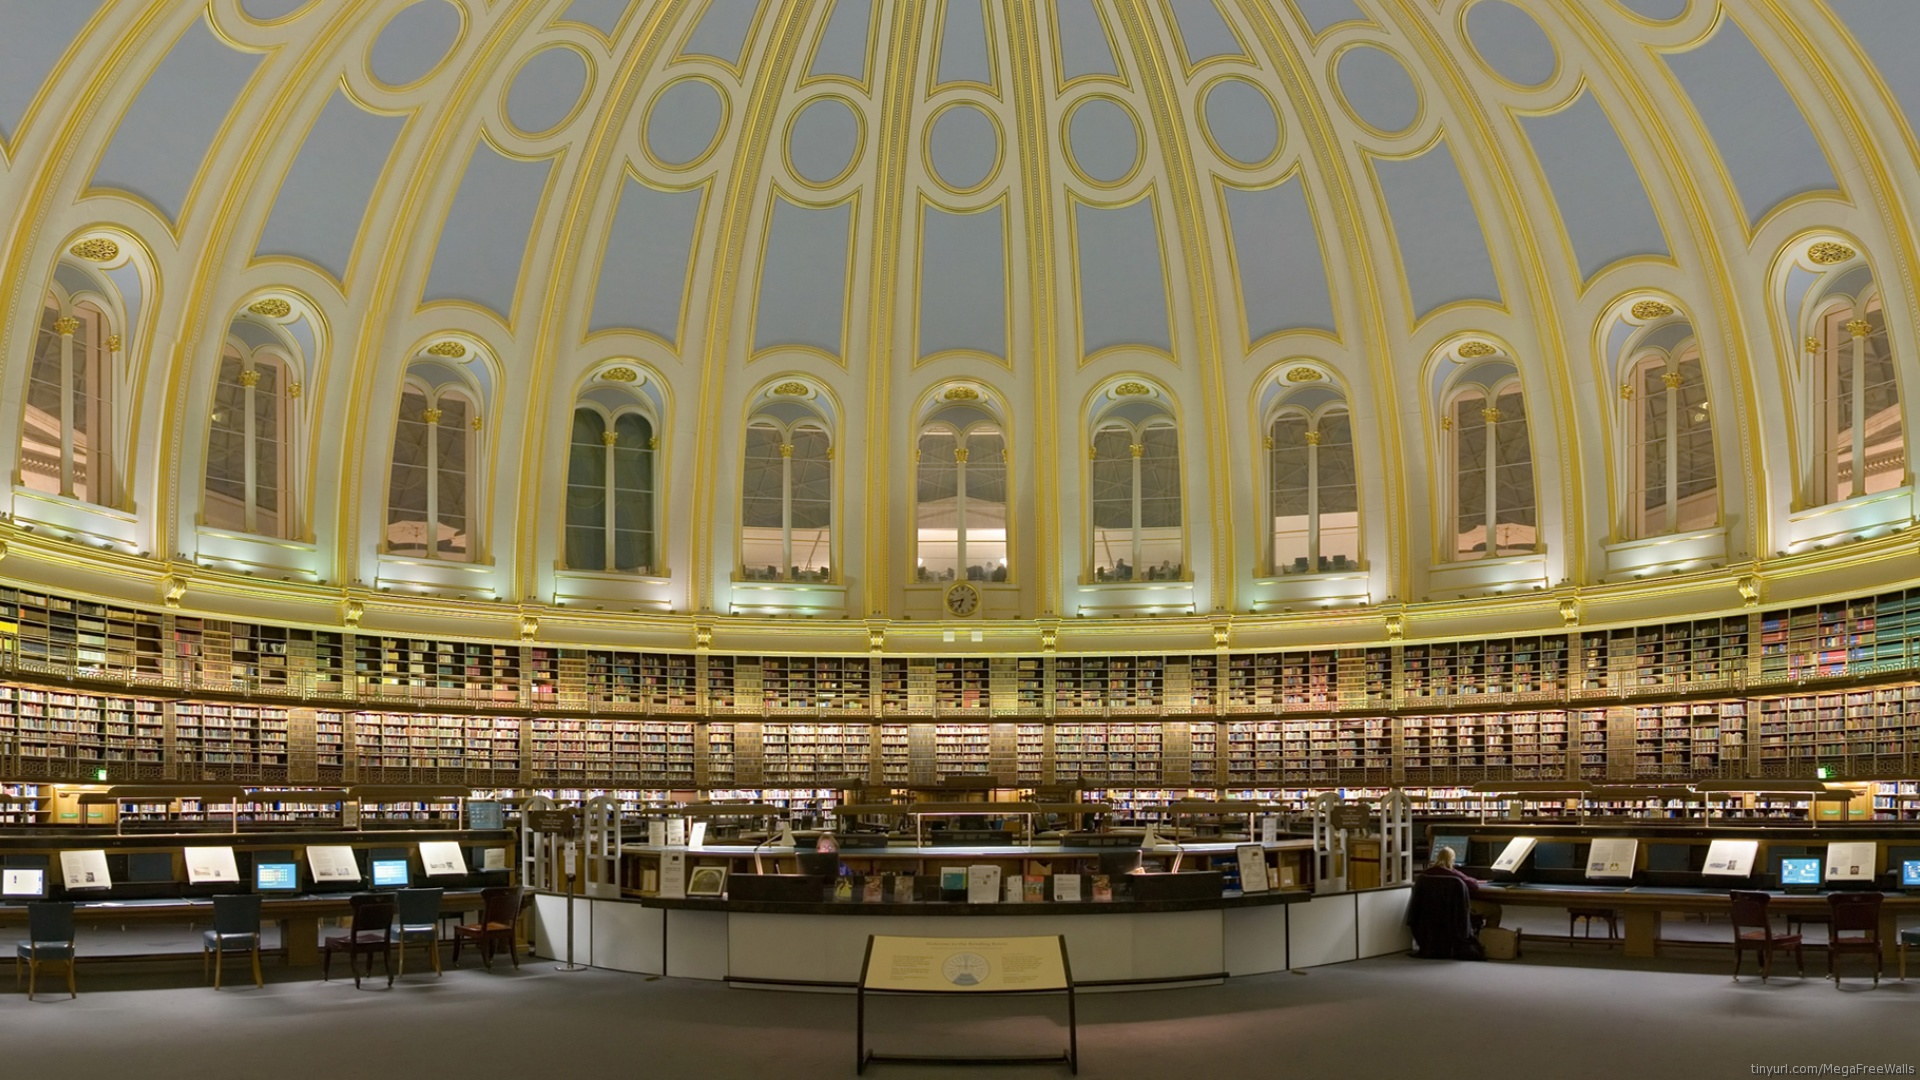 man made, room, architecture, interior, library, museum 1080p